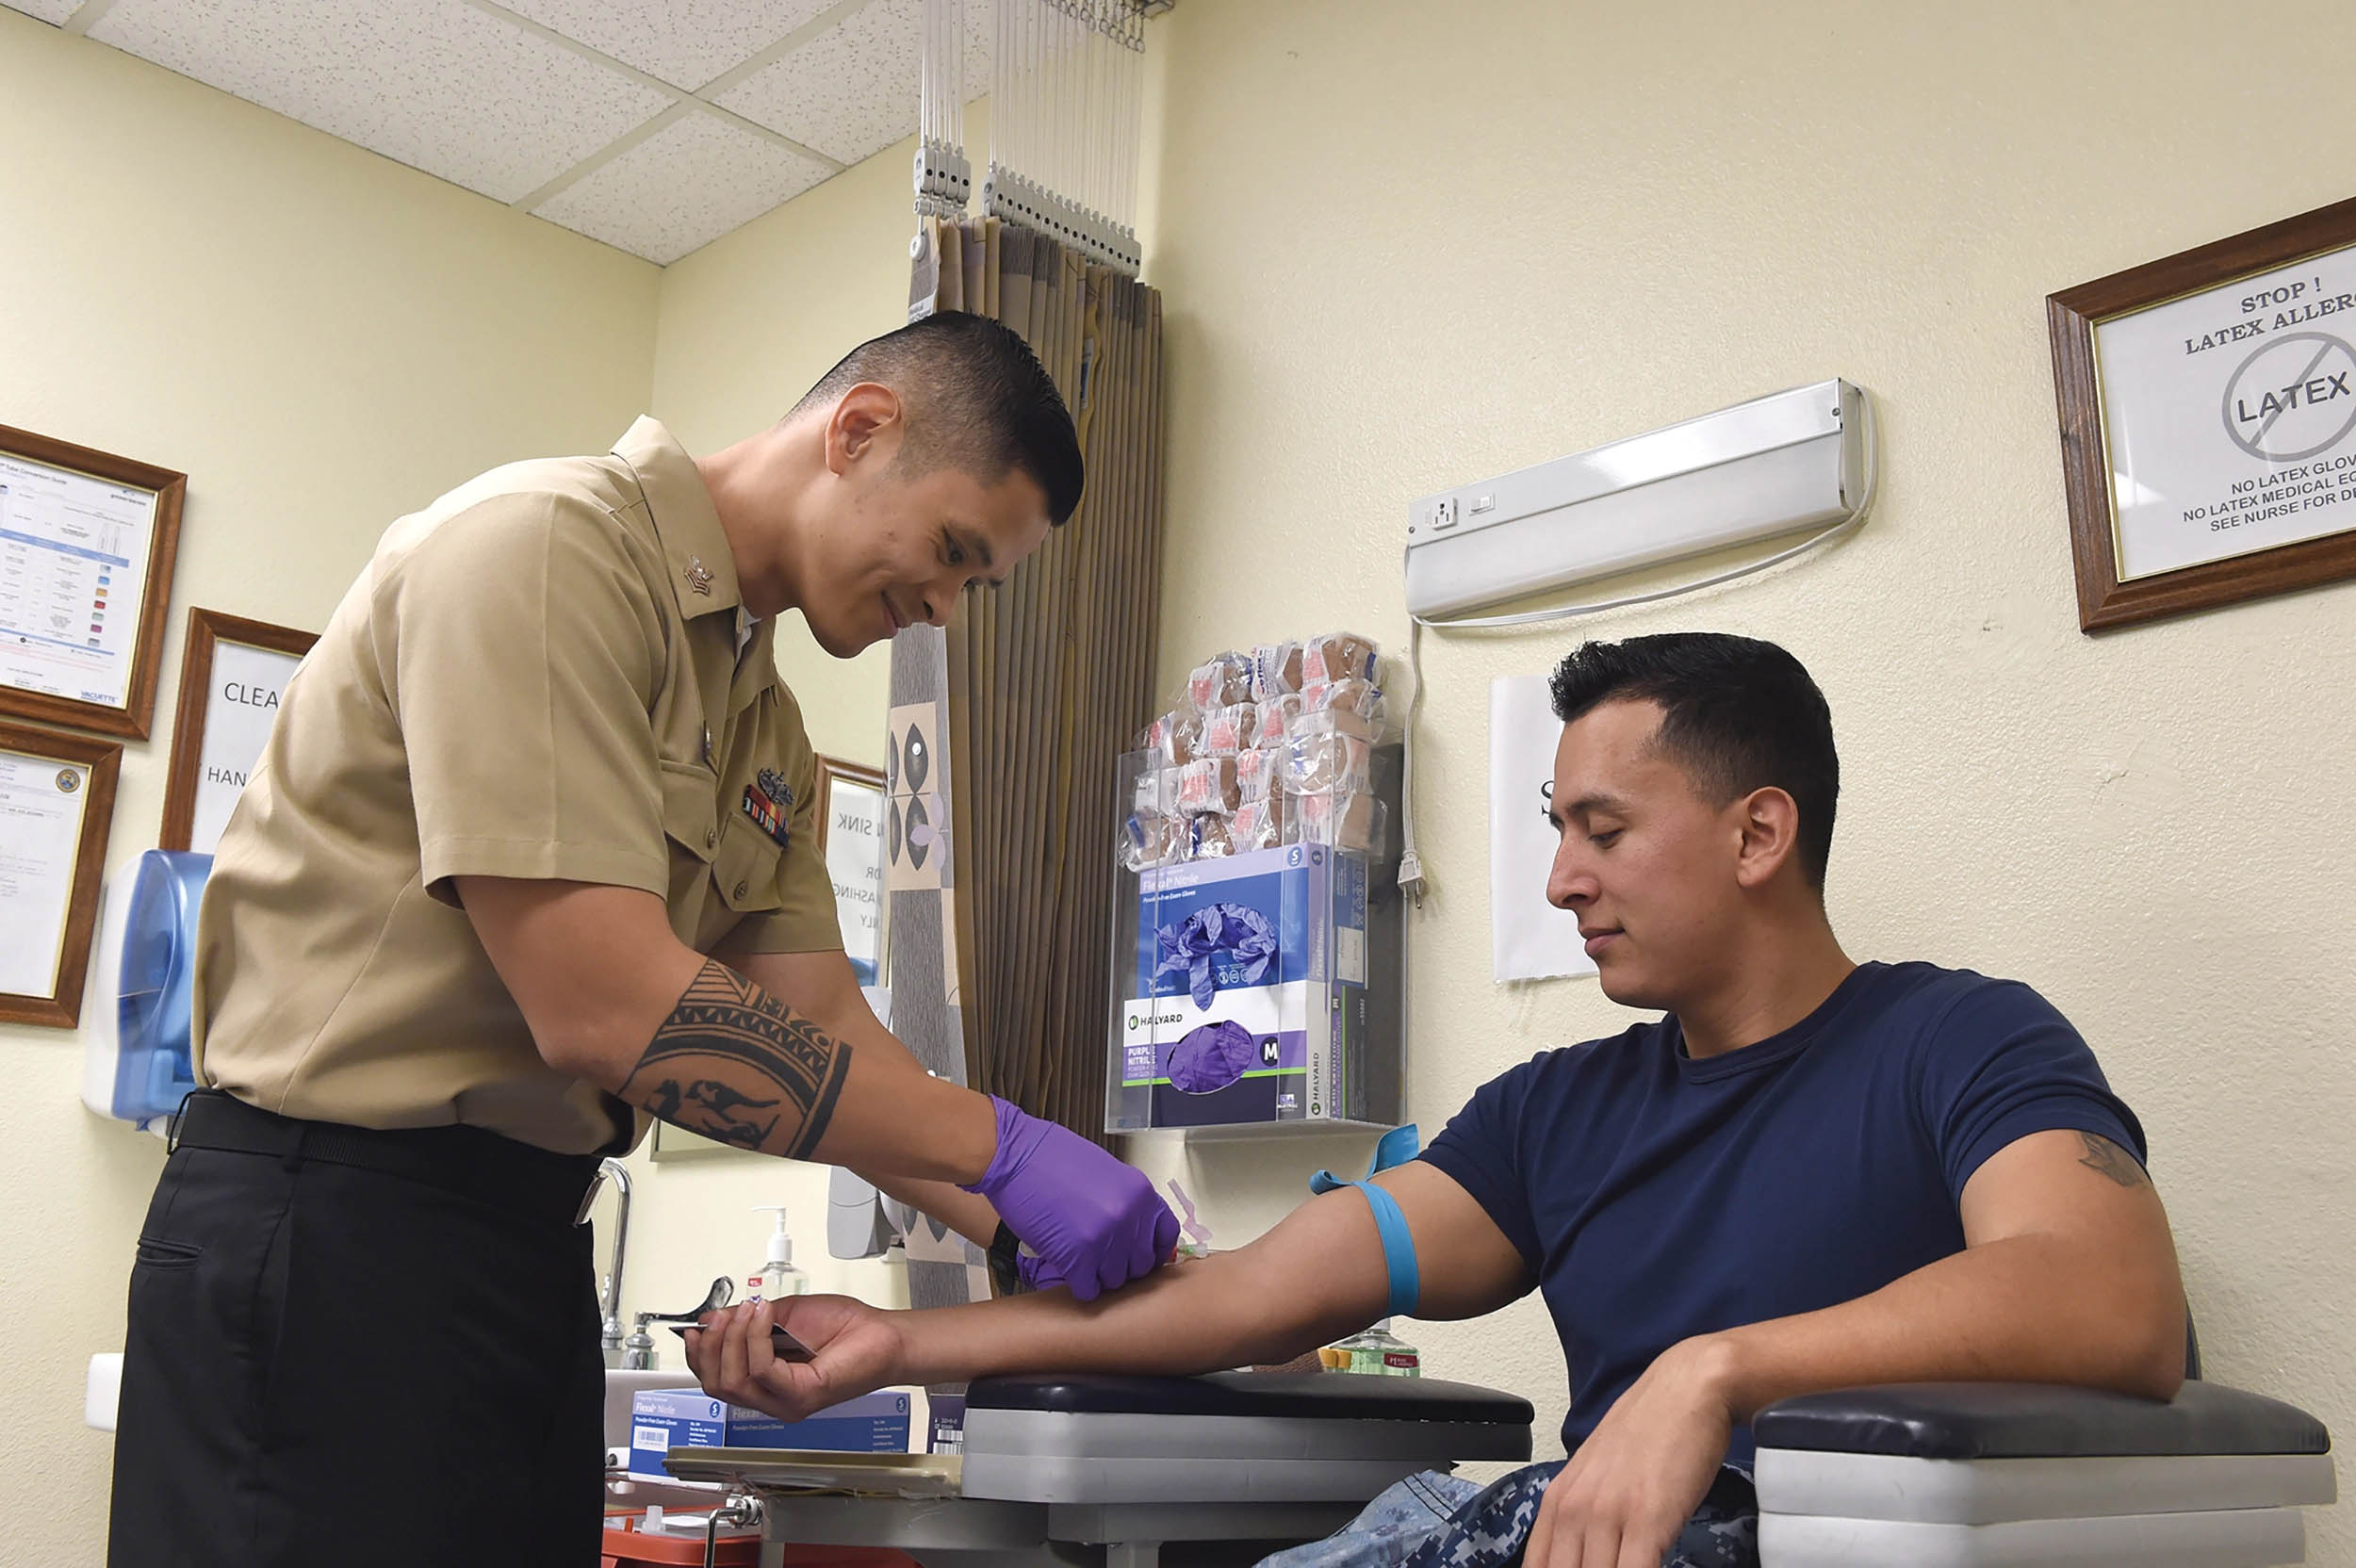 Hospital Corpsman 1st Class Oliver Arceo draws blood for Sailor’s annual HIV test at North Island Medical Clinic, Naval Air Station North Island, Coronado, California, January 7, 2017 (U.S. Navy/Marie A. Montez)